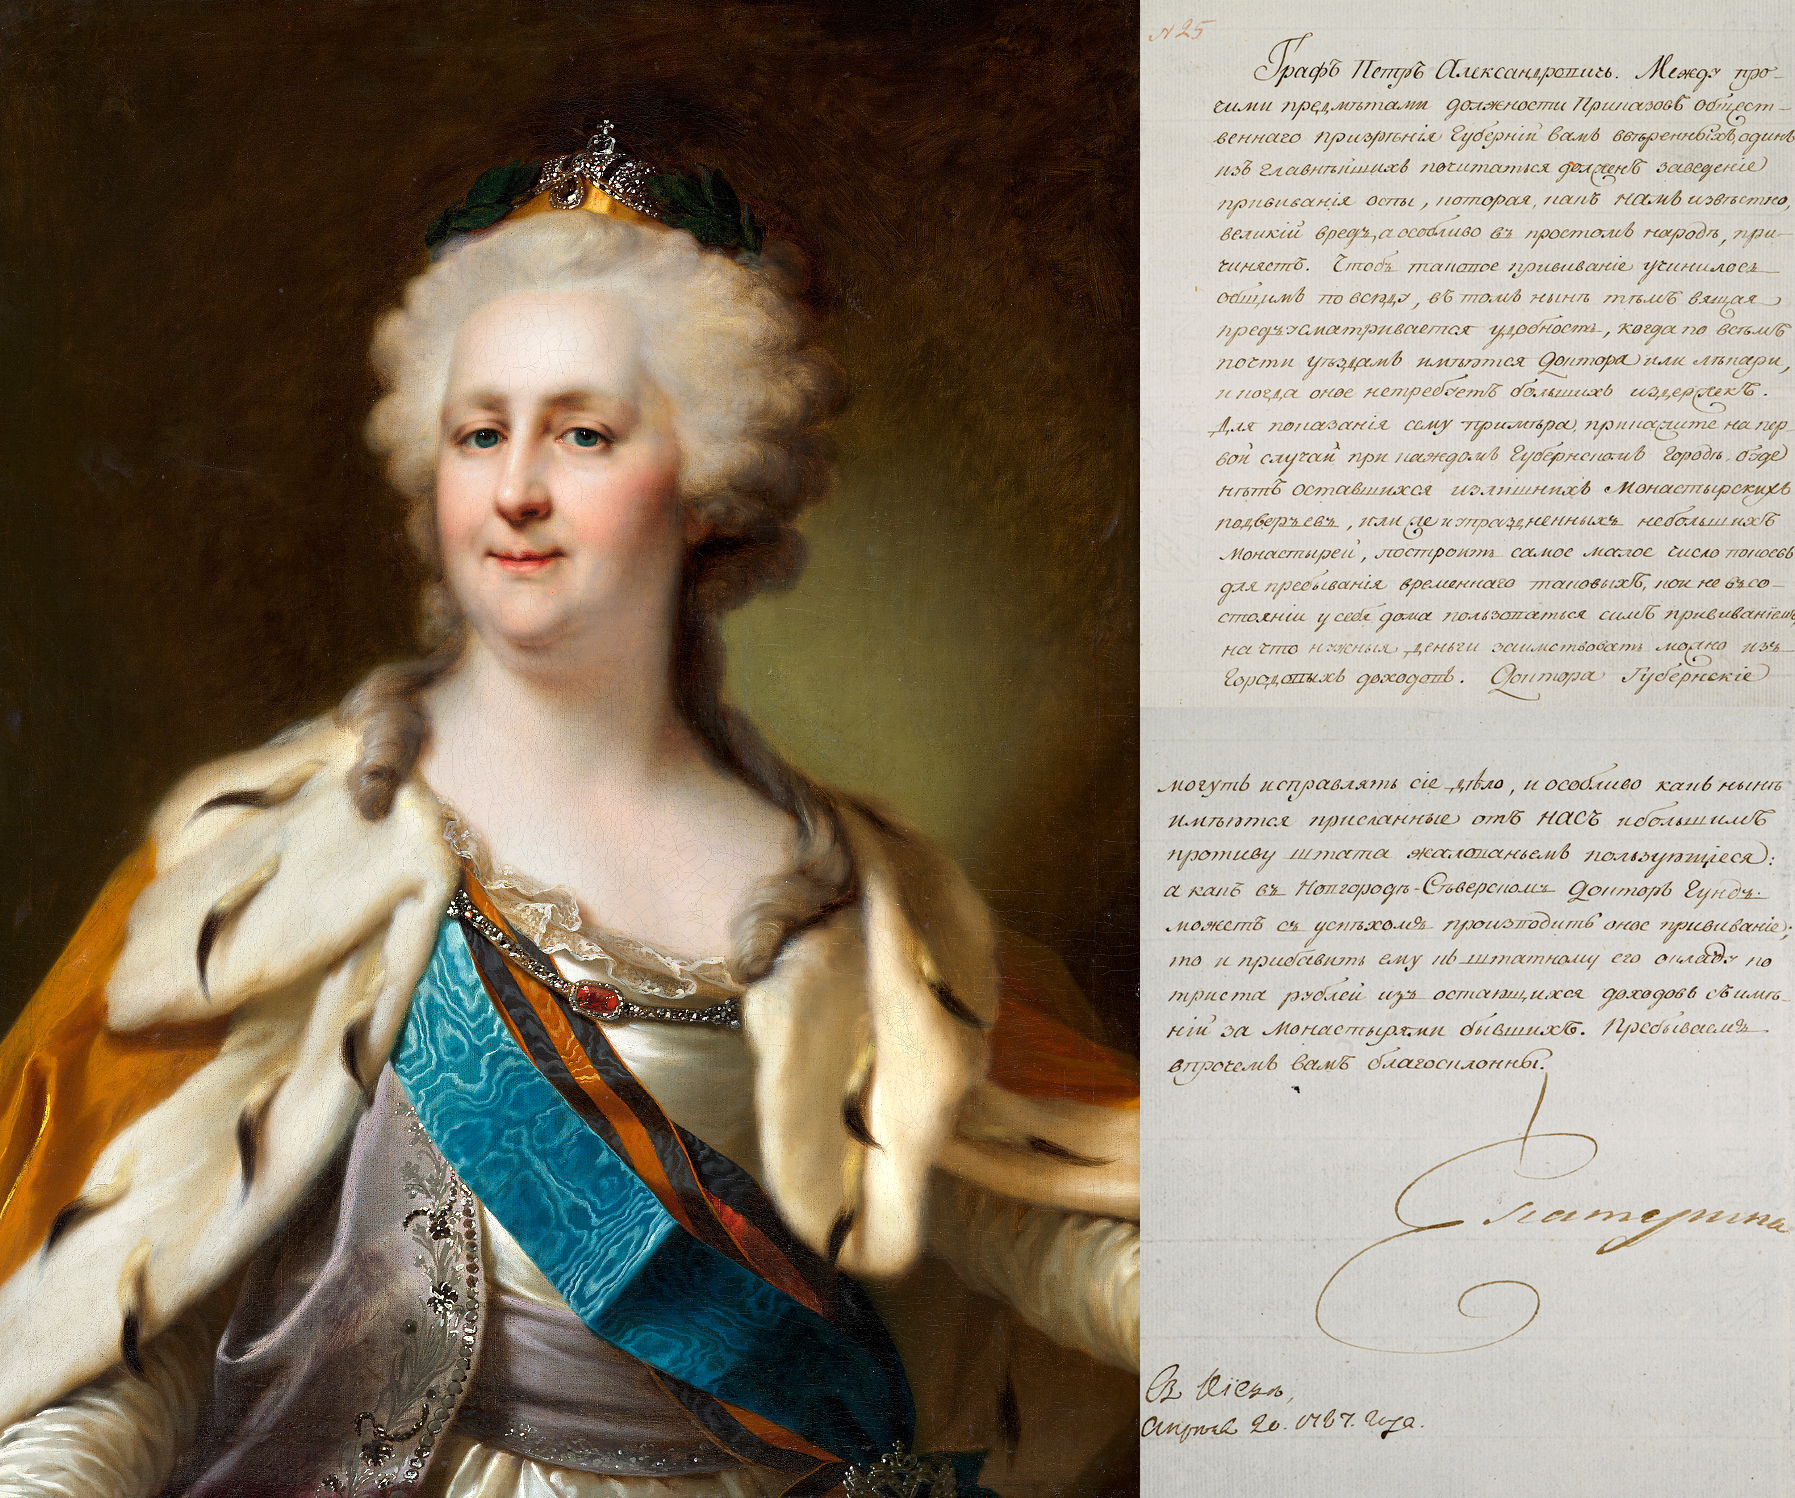 <a href='/en/catalogue/view?id=14663'>Lot 14.</a> Portrait of the Empress Catherine the Great by Dmitry Levitsky, with Letter from Catherine the Great to Count Piotr Aleksandrovich Rumiantsev on Vaccination Against Smallpox, 20 April 1787, <i>PROPERTY FROM A DISTINGUISHED PRIVATE COLLECTION, RUSSIA</i><br> SOLD FOR 951,000 GBP.